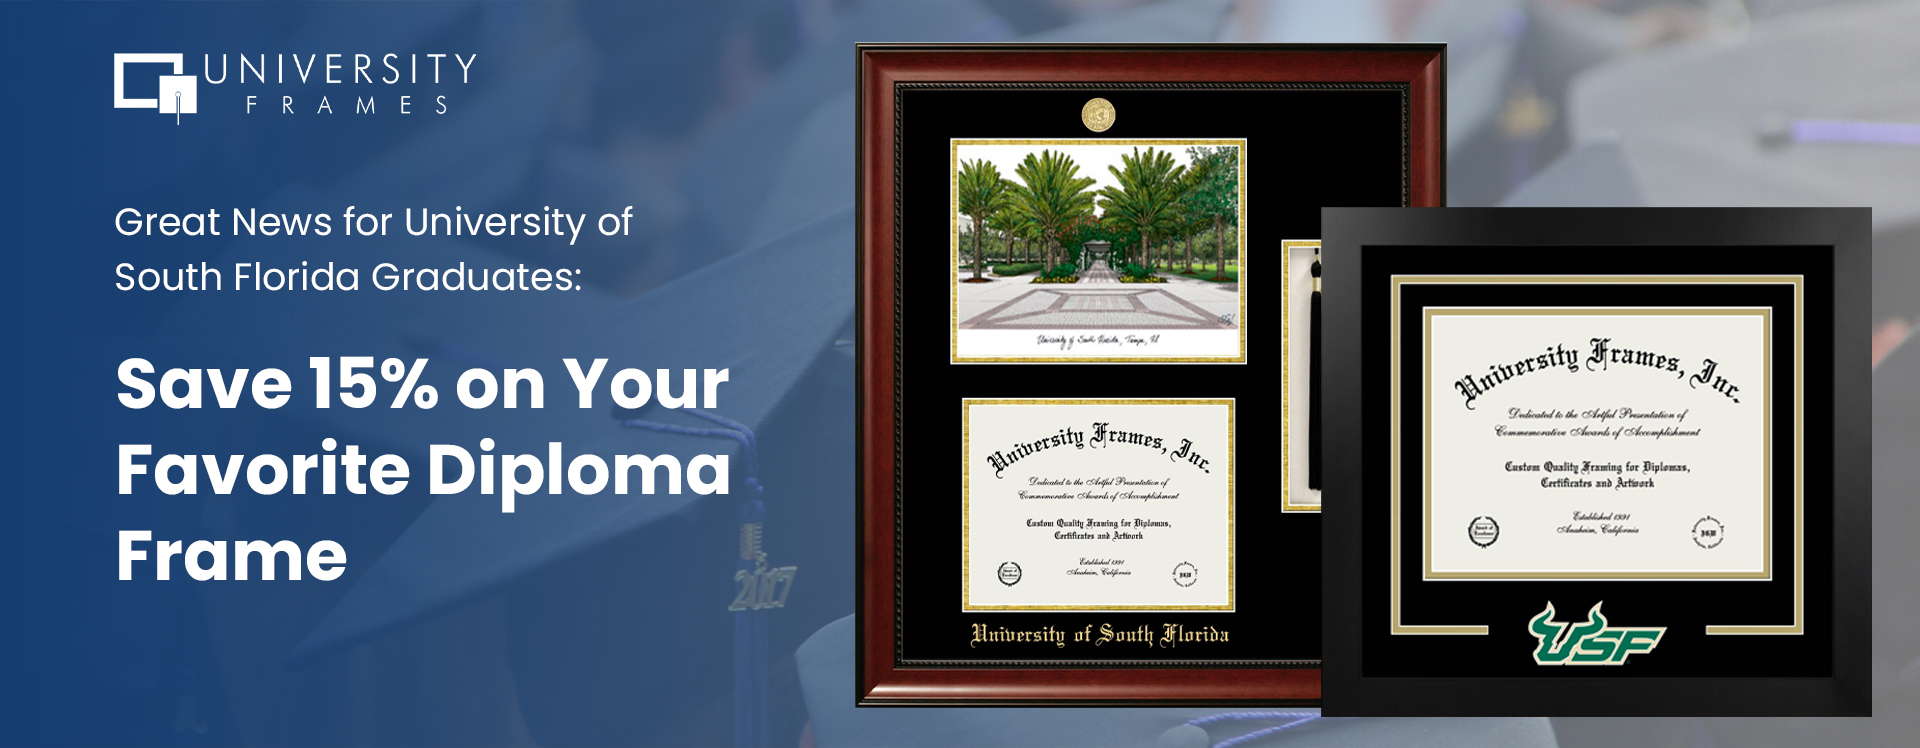 Great News for University of South Florida Graduates: Save 15% on Your Favorite Diploma Frame